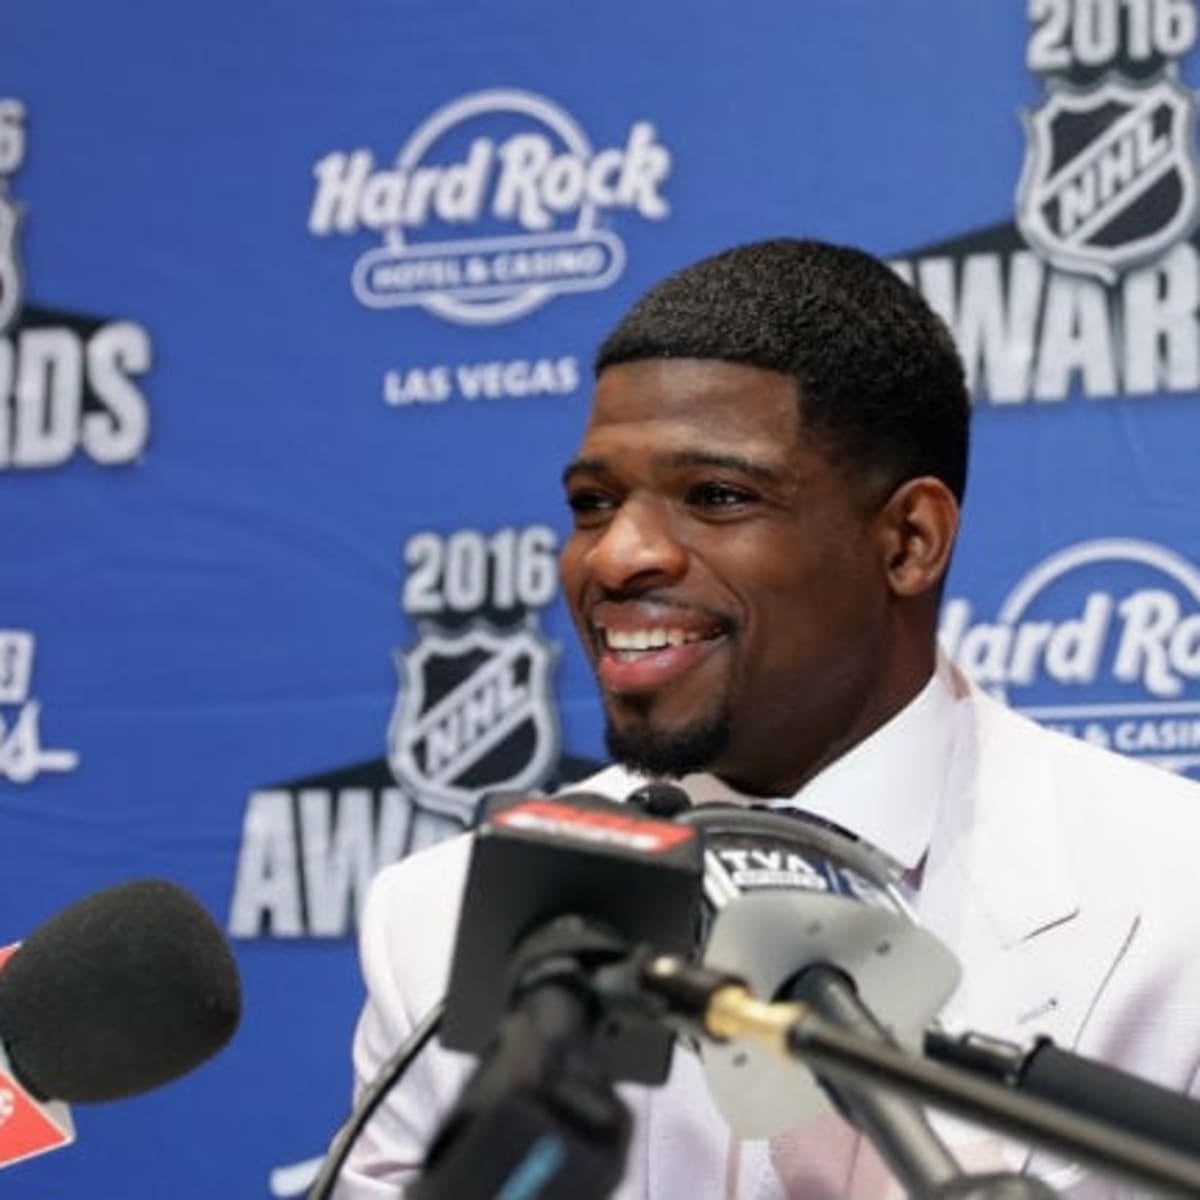 He's not perfect, but P.K. Subban will be pricey - The Globe and Mail